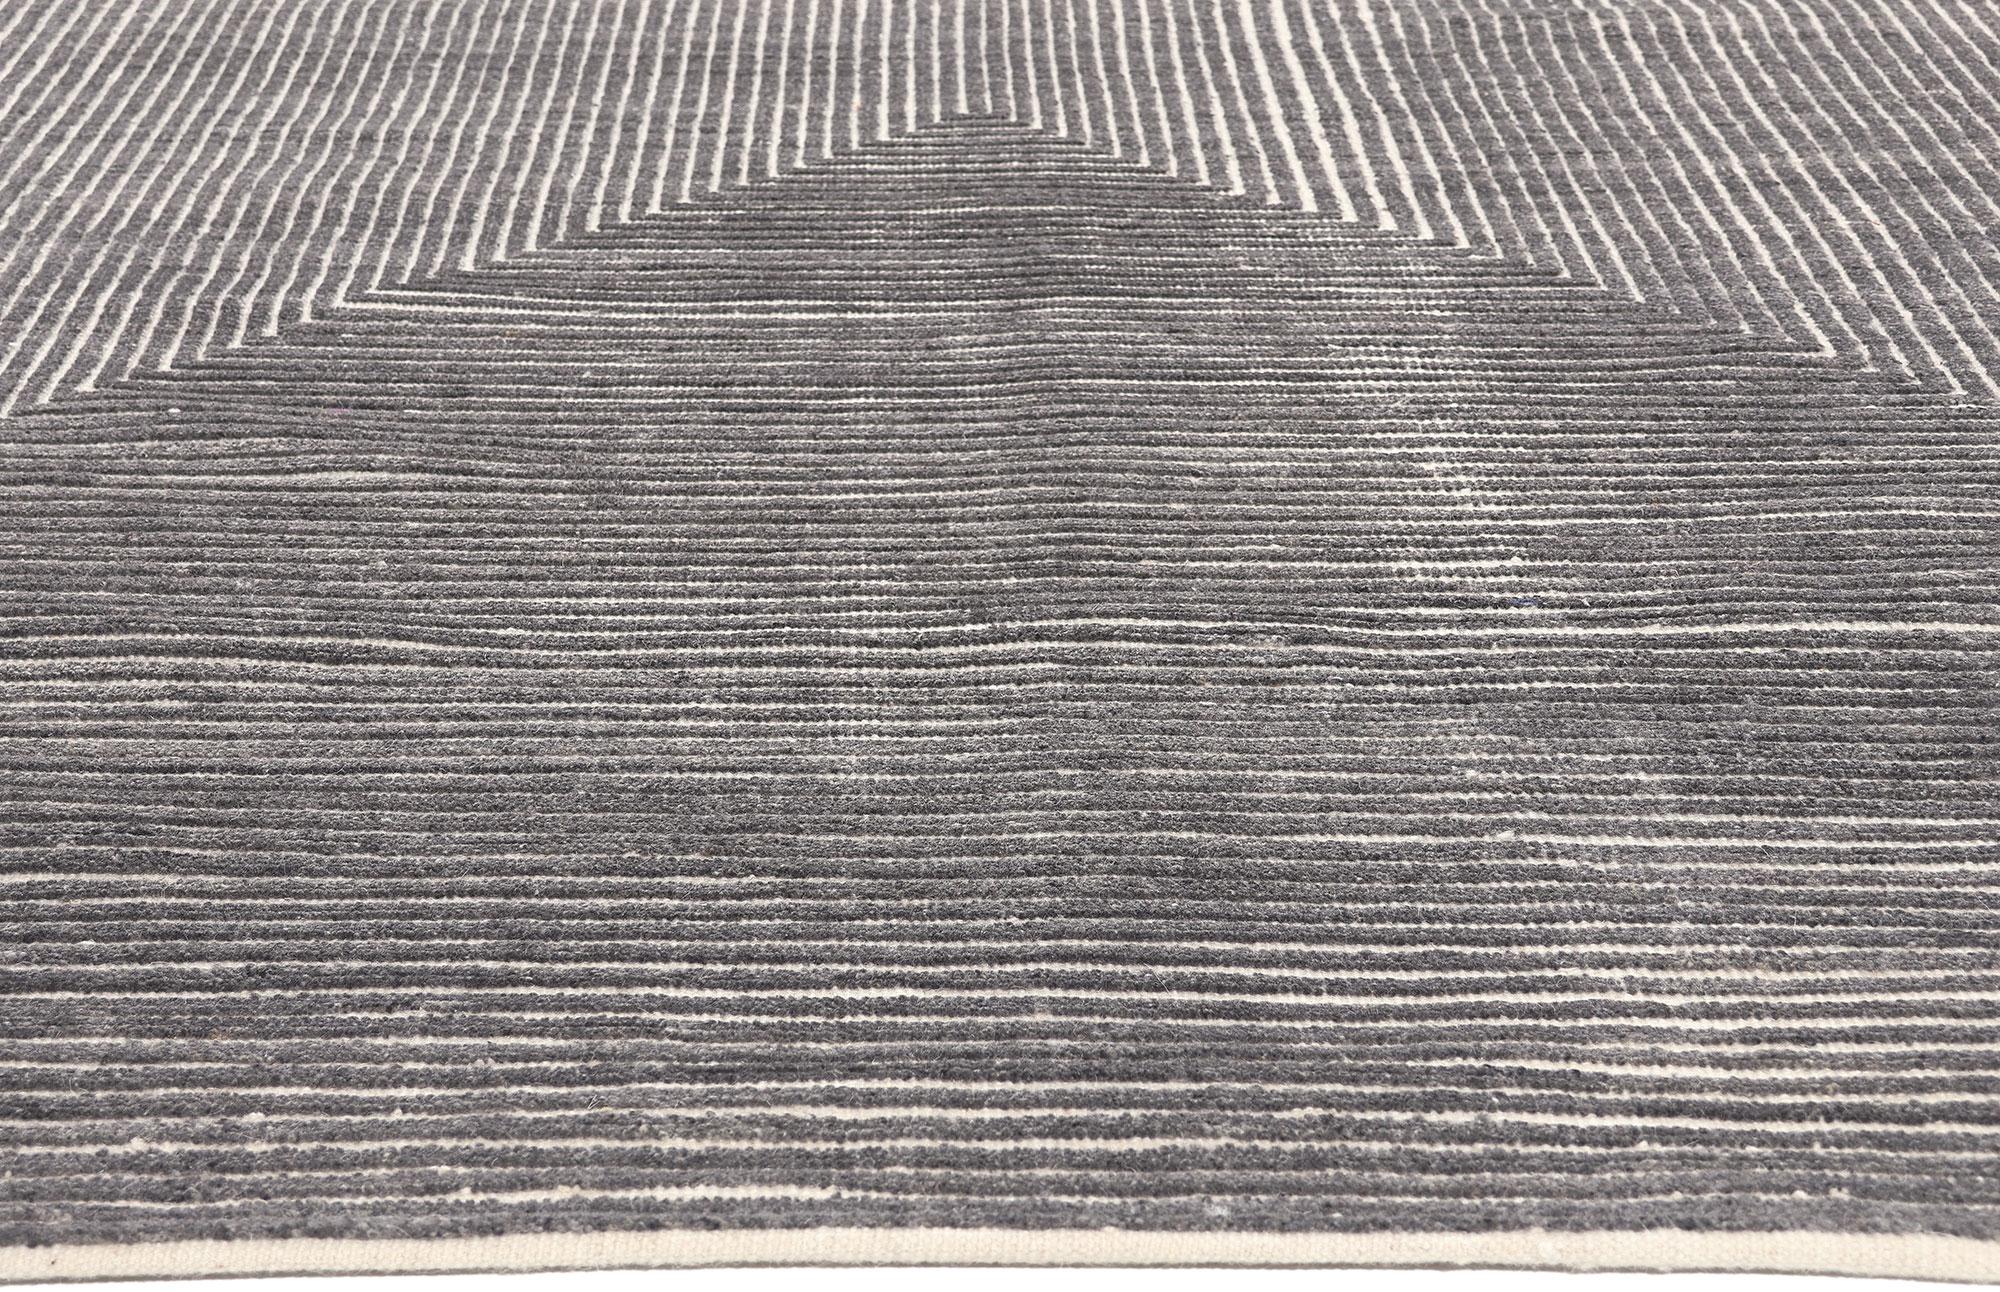 Hand-Knotted Modern Gray Opt Art High-Low Rug, Sublime Simplicity Meets Tantalizing Texture For Sale